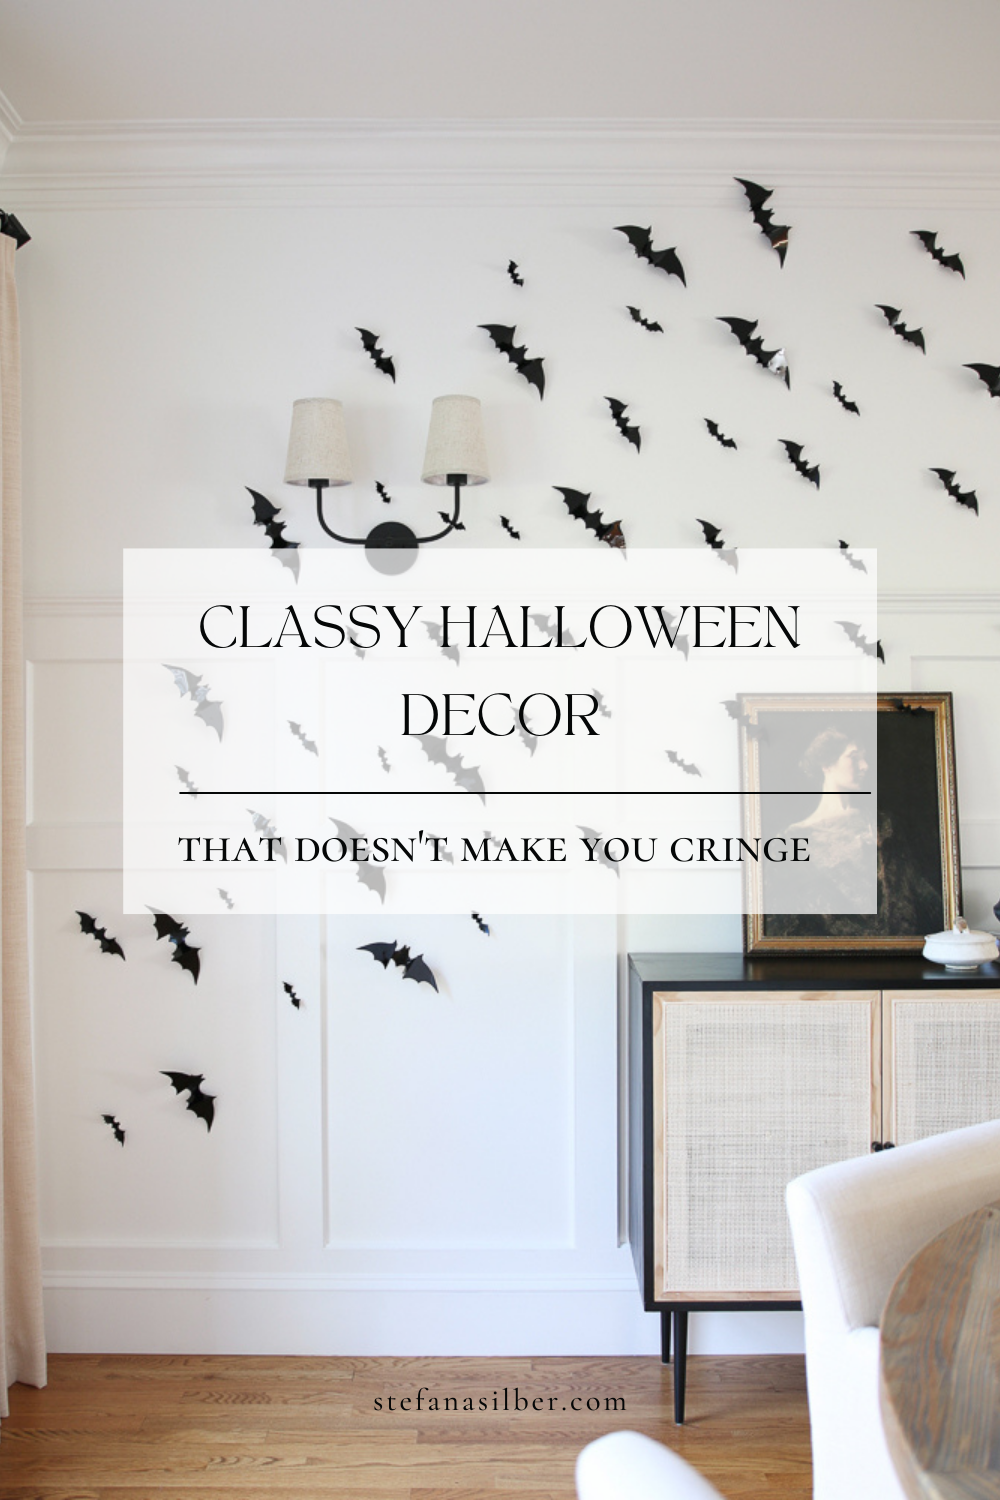 Classy halloween decor ideas to incorporate for your home. Avoid cheap and plastic toy like decor and use these instead.